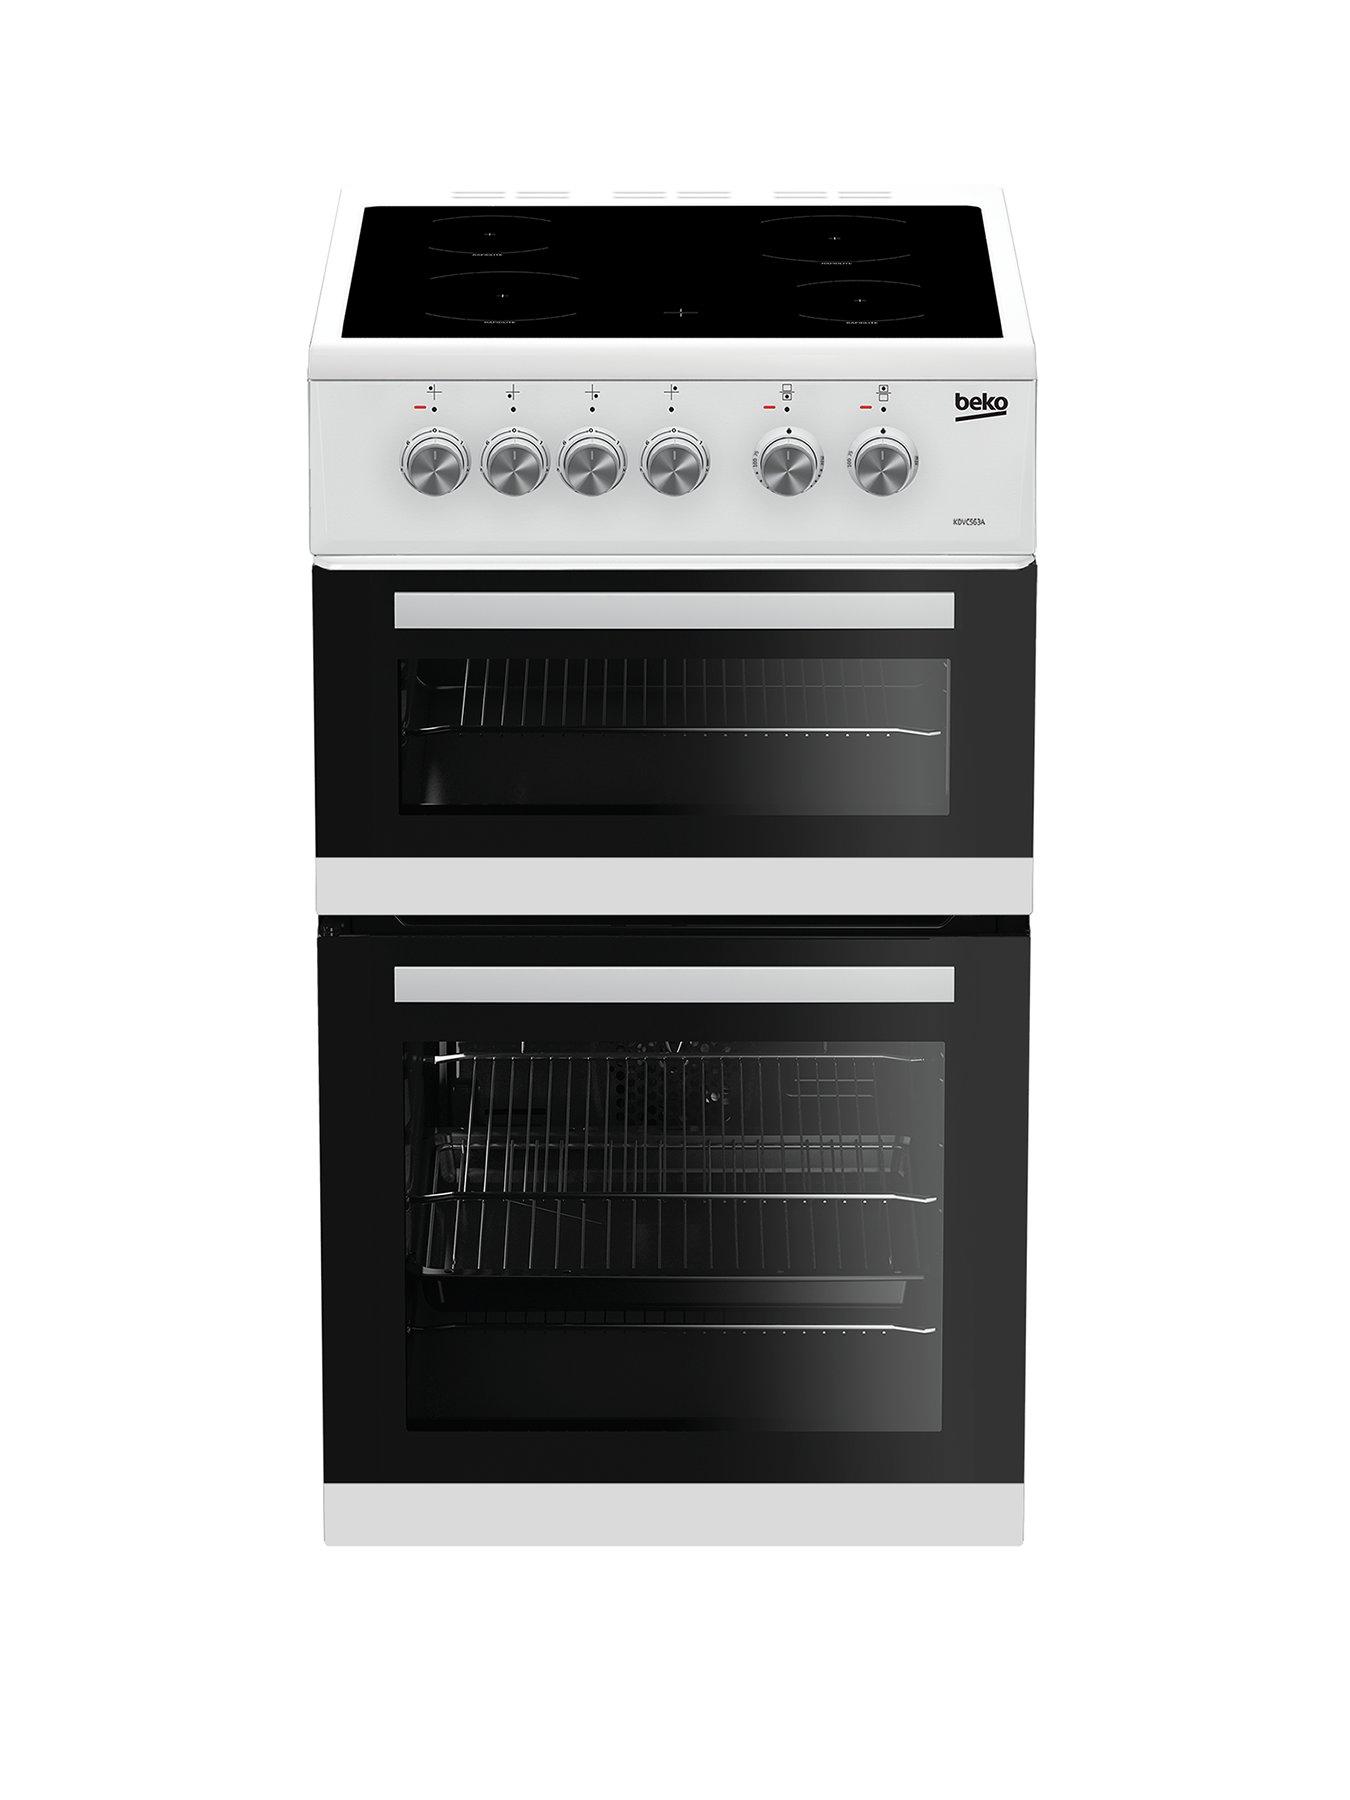 Beko Kdvc563Aw 50Cm Double Oven Electric Cooker - White With Connection Review thumbnail